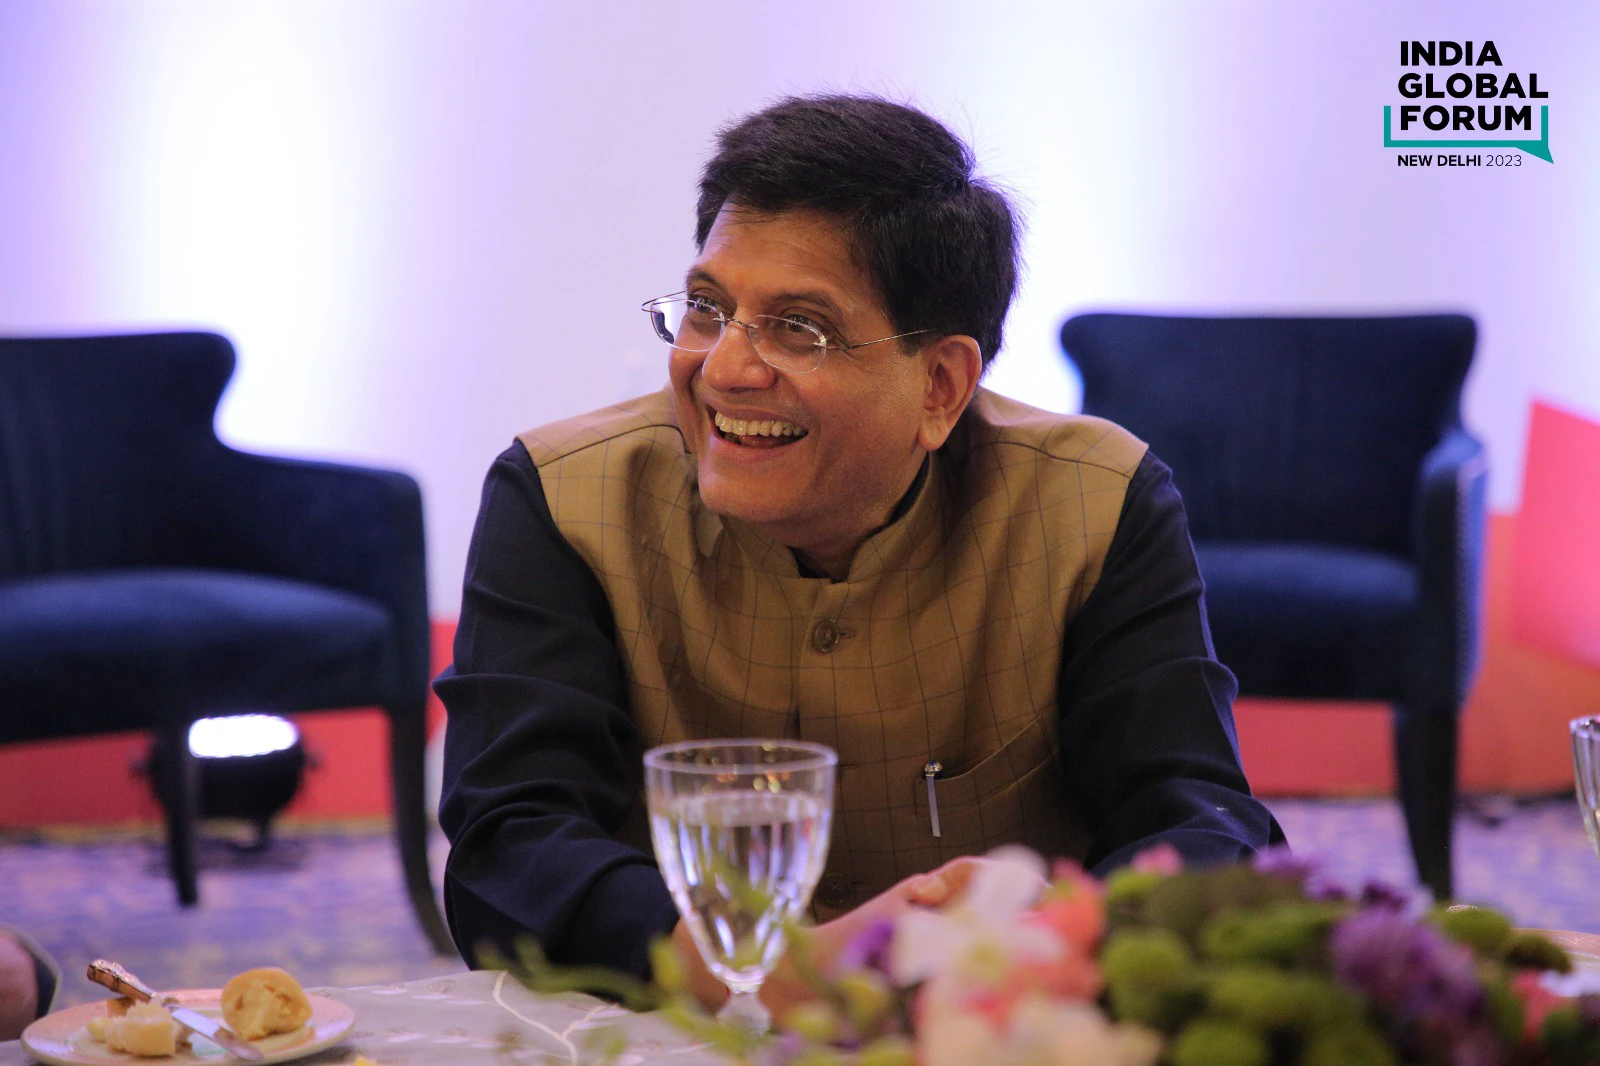 “When we talk about Self-Reliant India (Atmanirbhar Bharat), we are not thinking of closing the doors, in fact opening it further wide,” says Hon. Piyush Goyal at the Investors Interaction & Opening Session of India Global Forum Annual Summit 2023